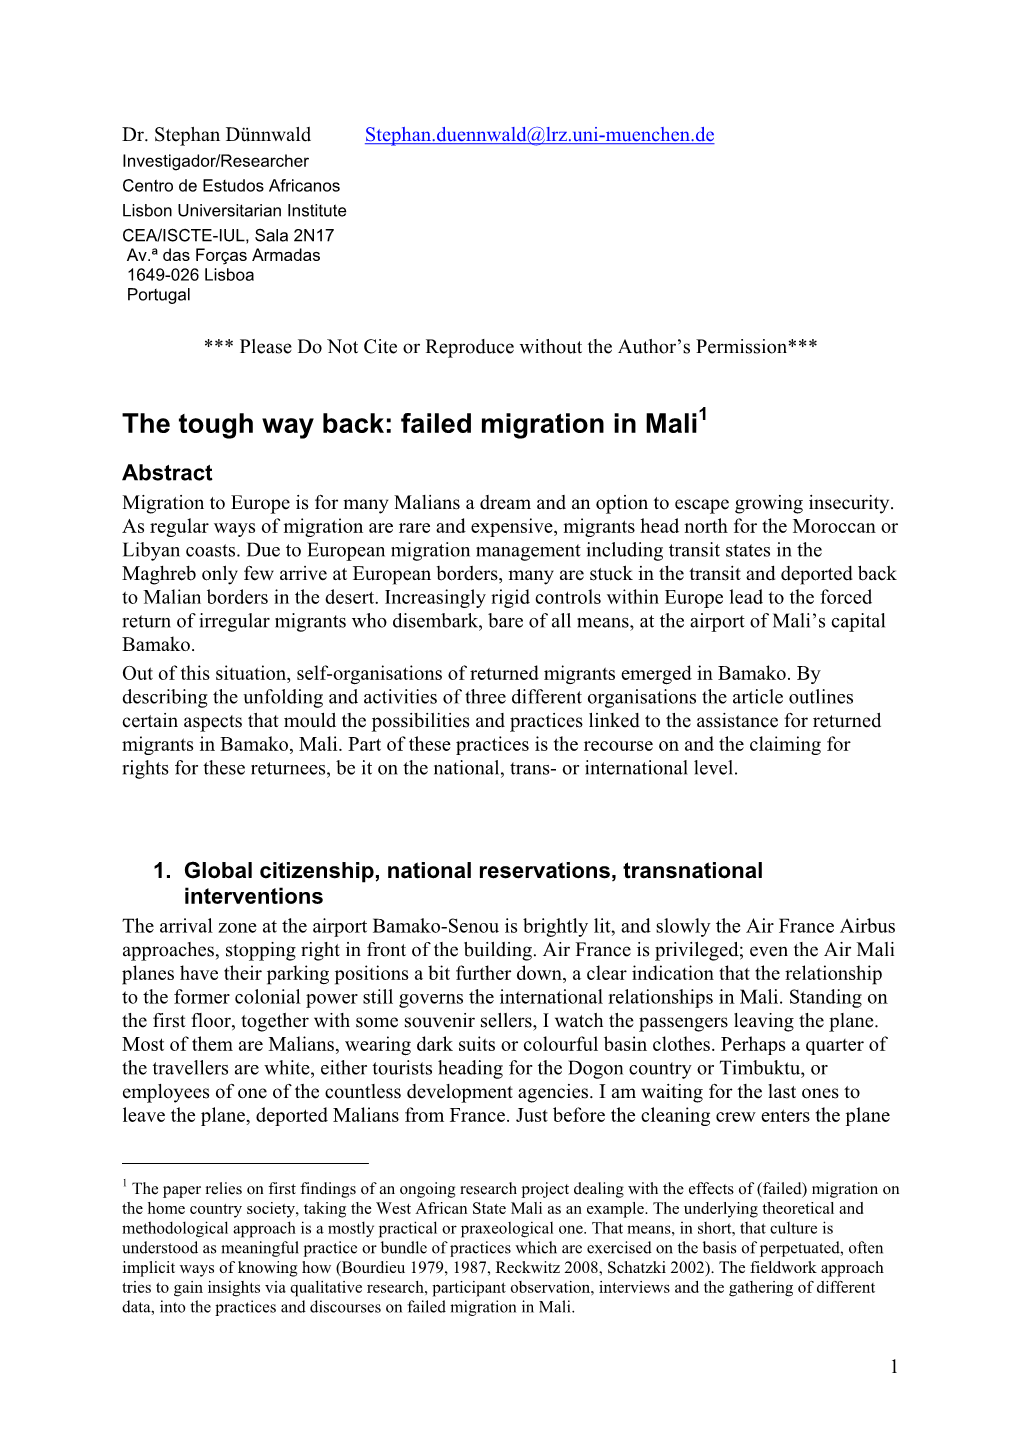 The Tough Way Back: Failed Migration in Mali1